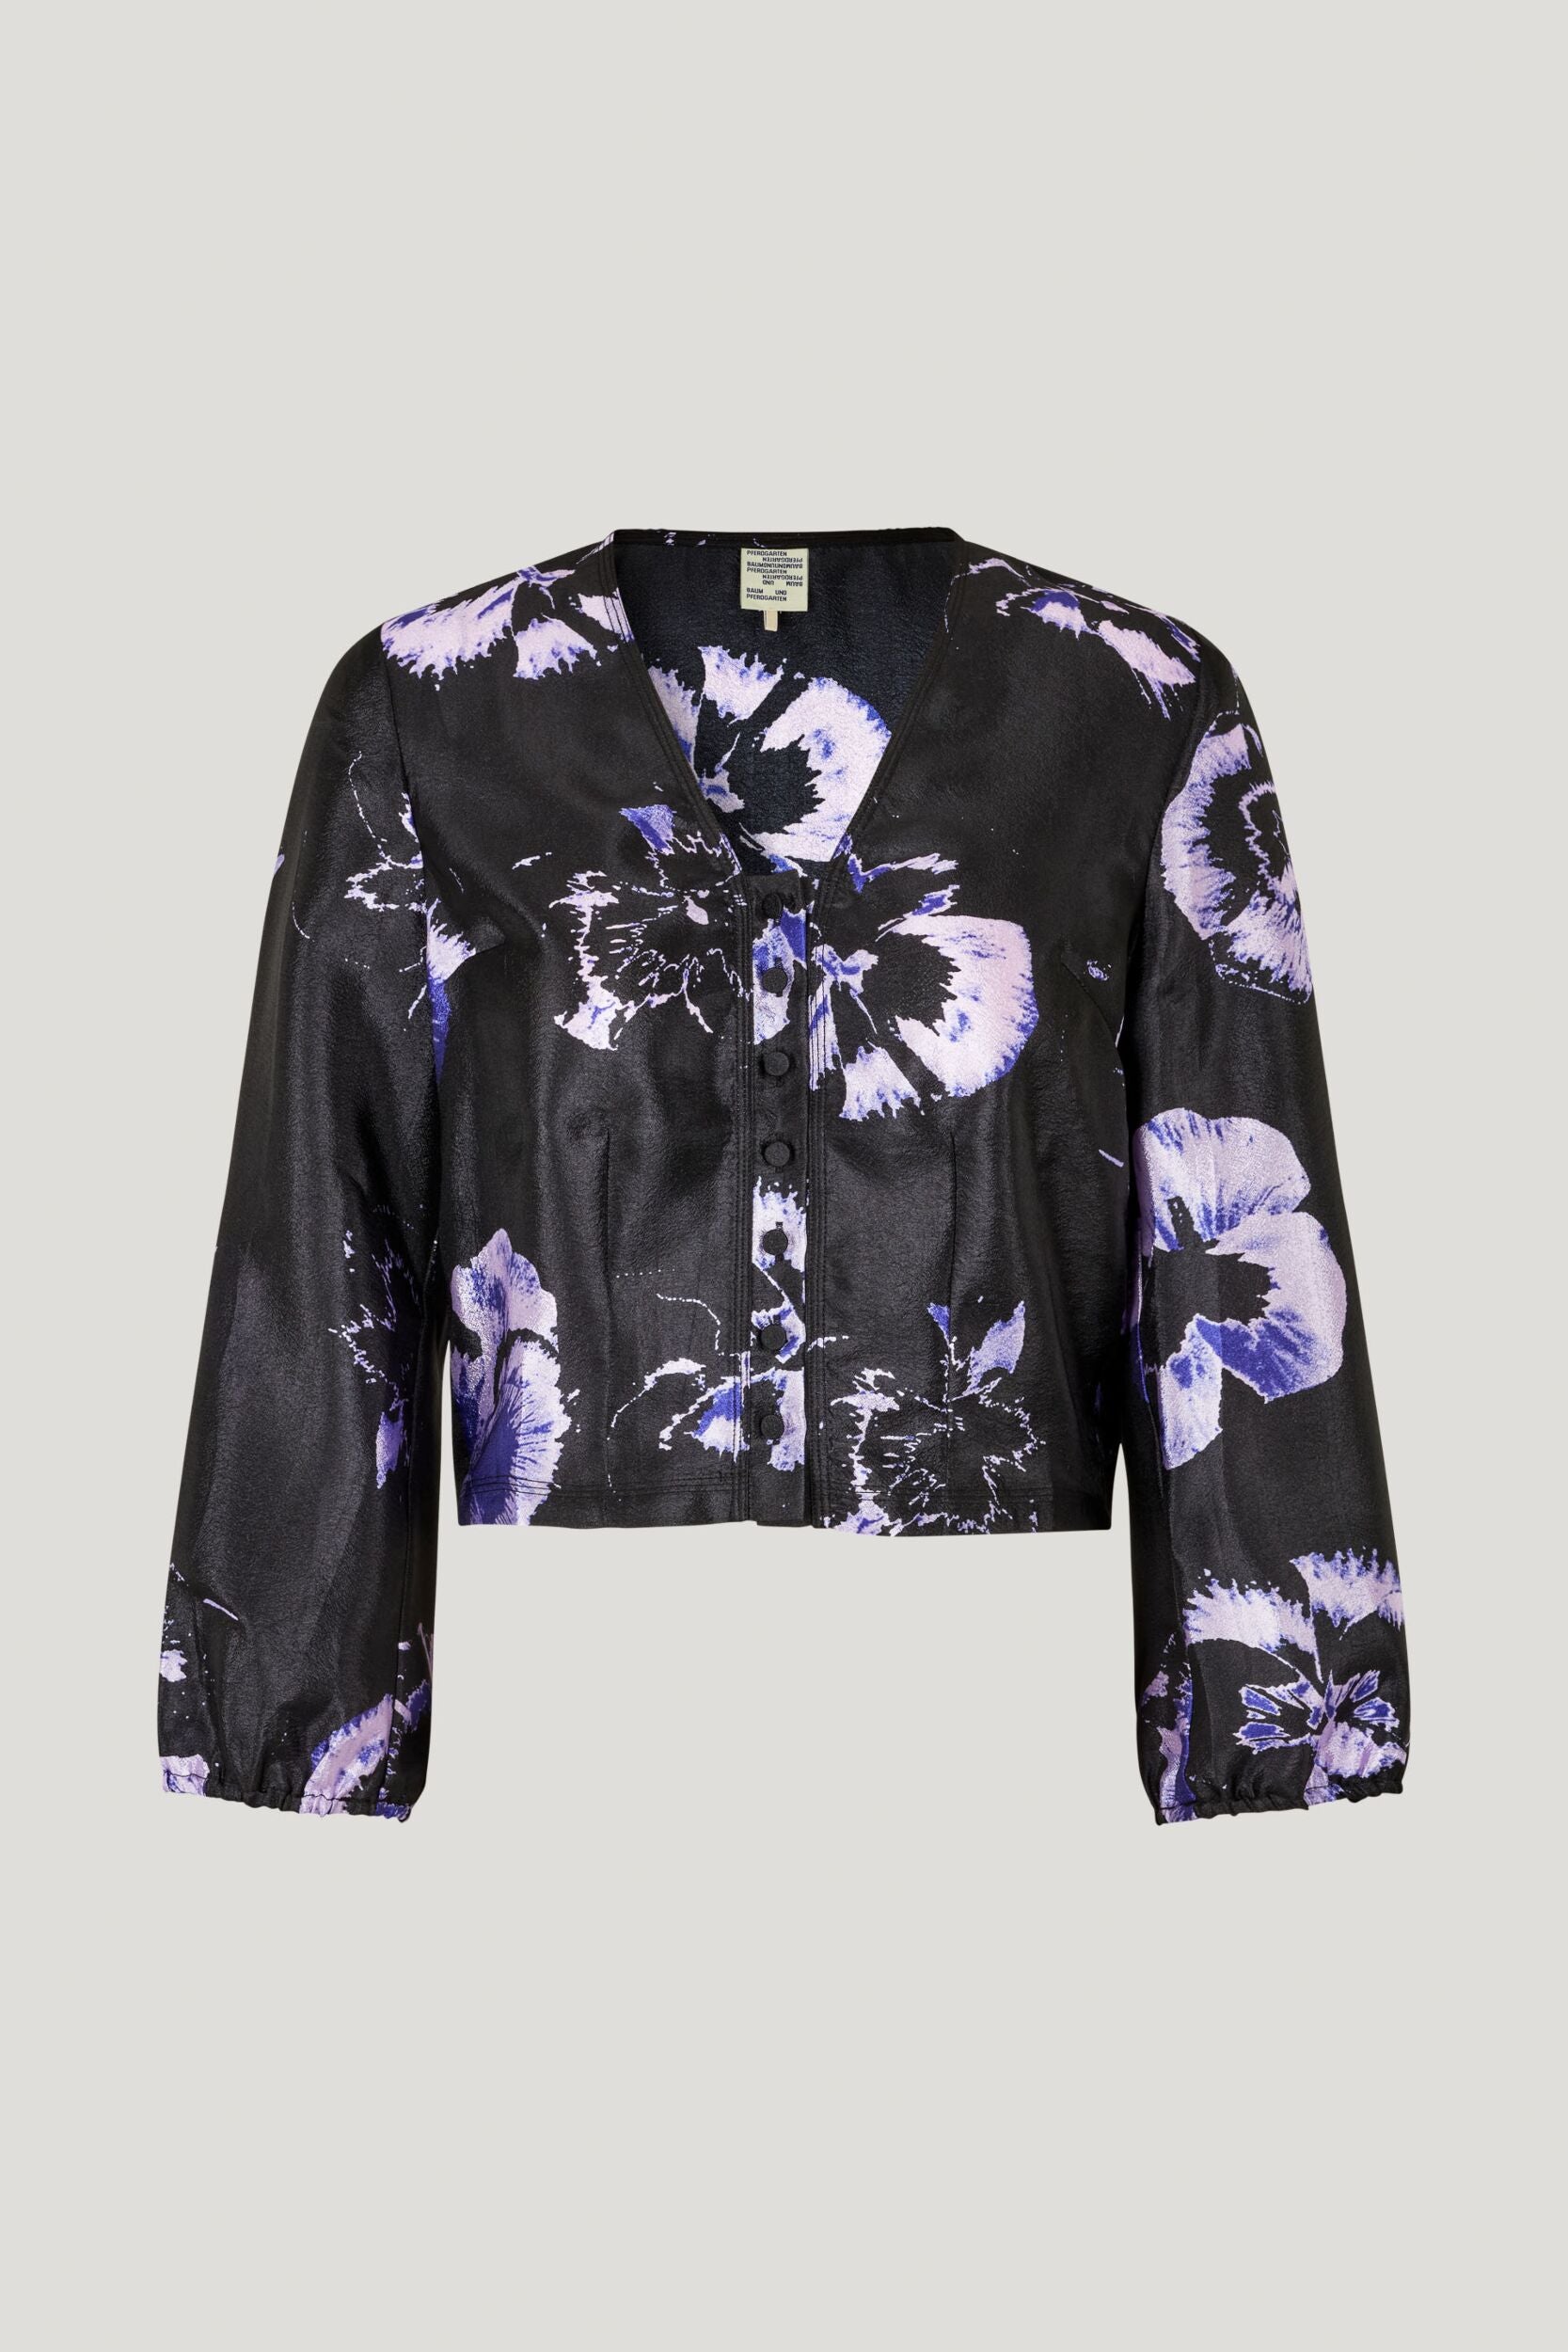 V neck collarless black long sleeved shirt in black with large purple pansy print